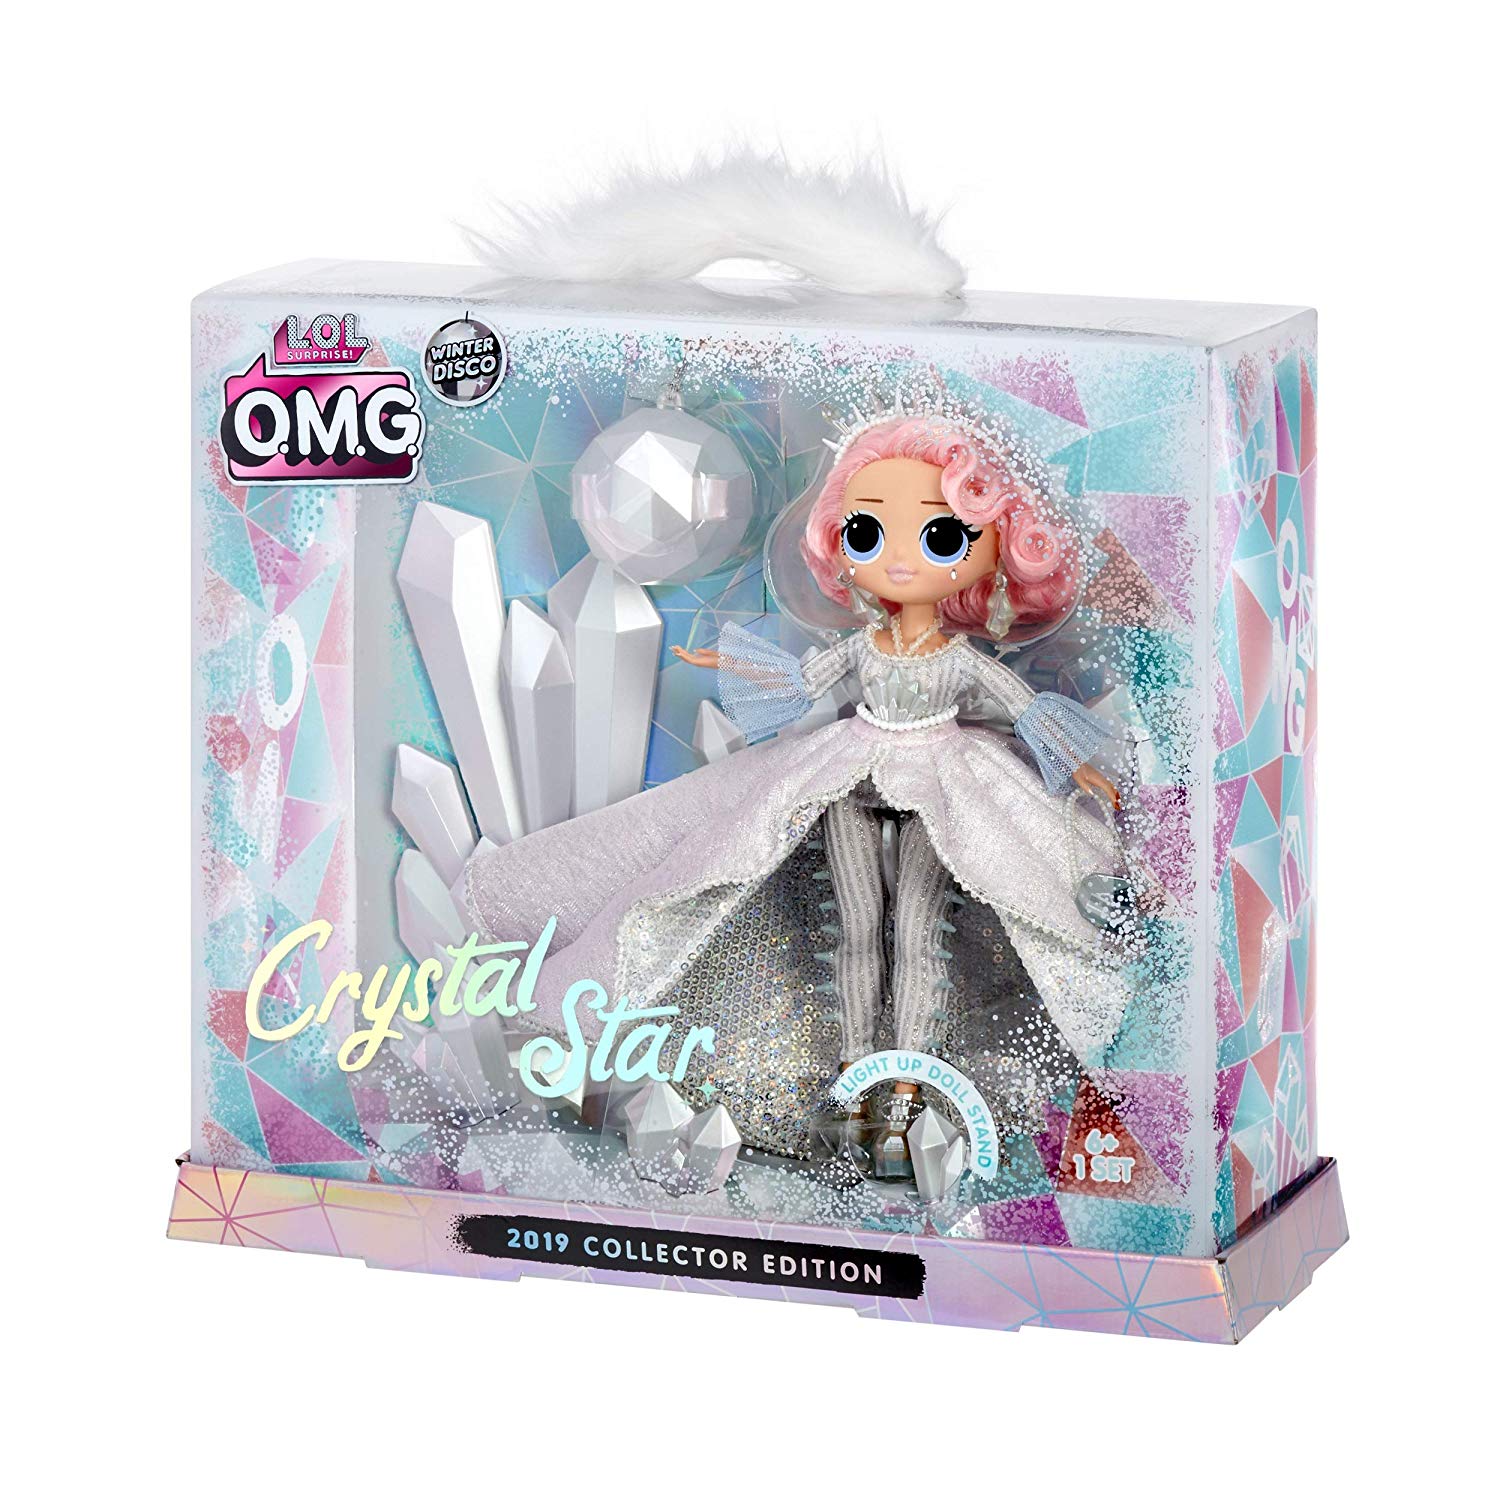 LOL Surprise! OMG Crystal Star 2019 Collector Edition Fashion Doll is